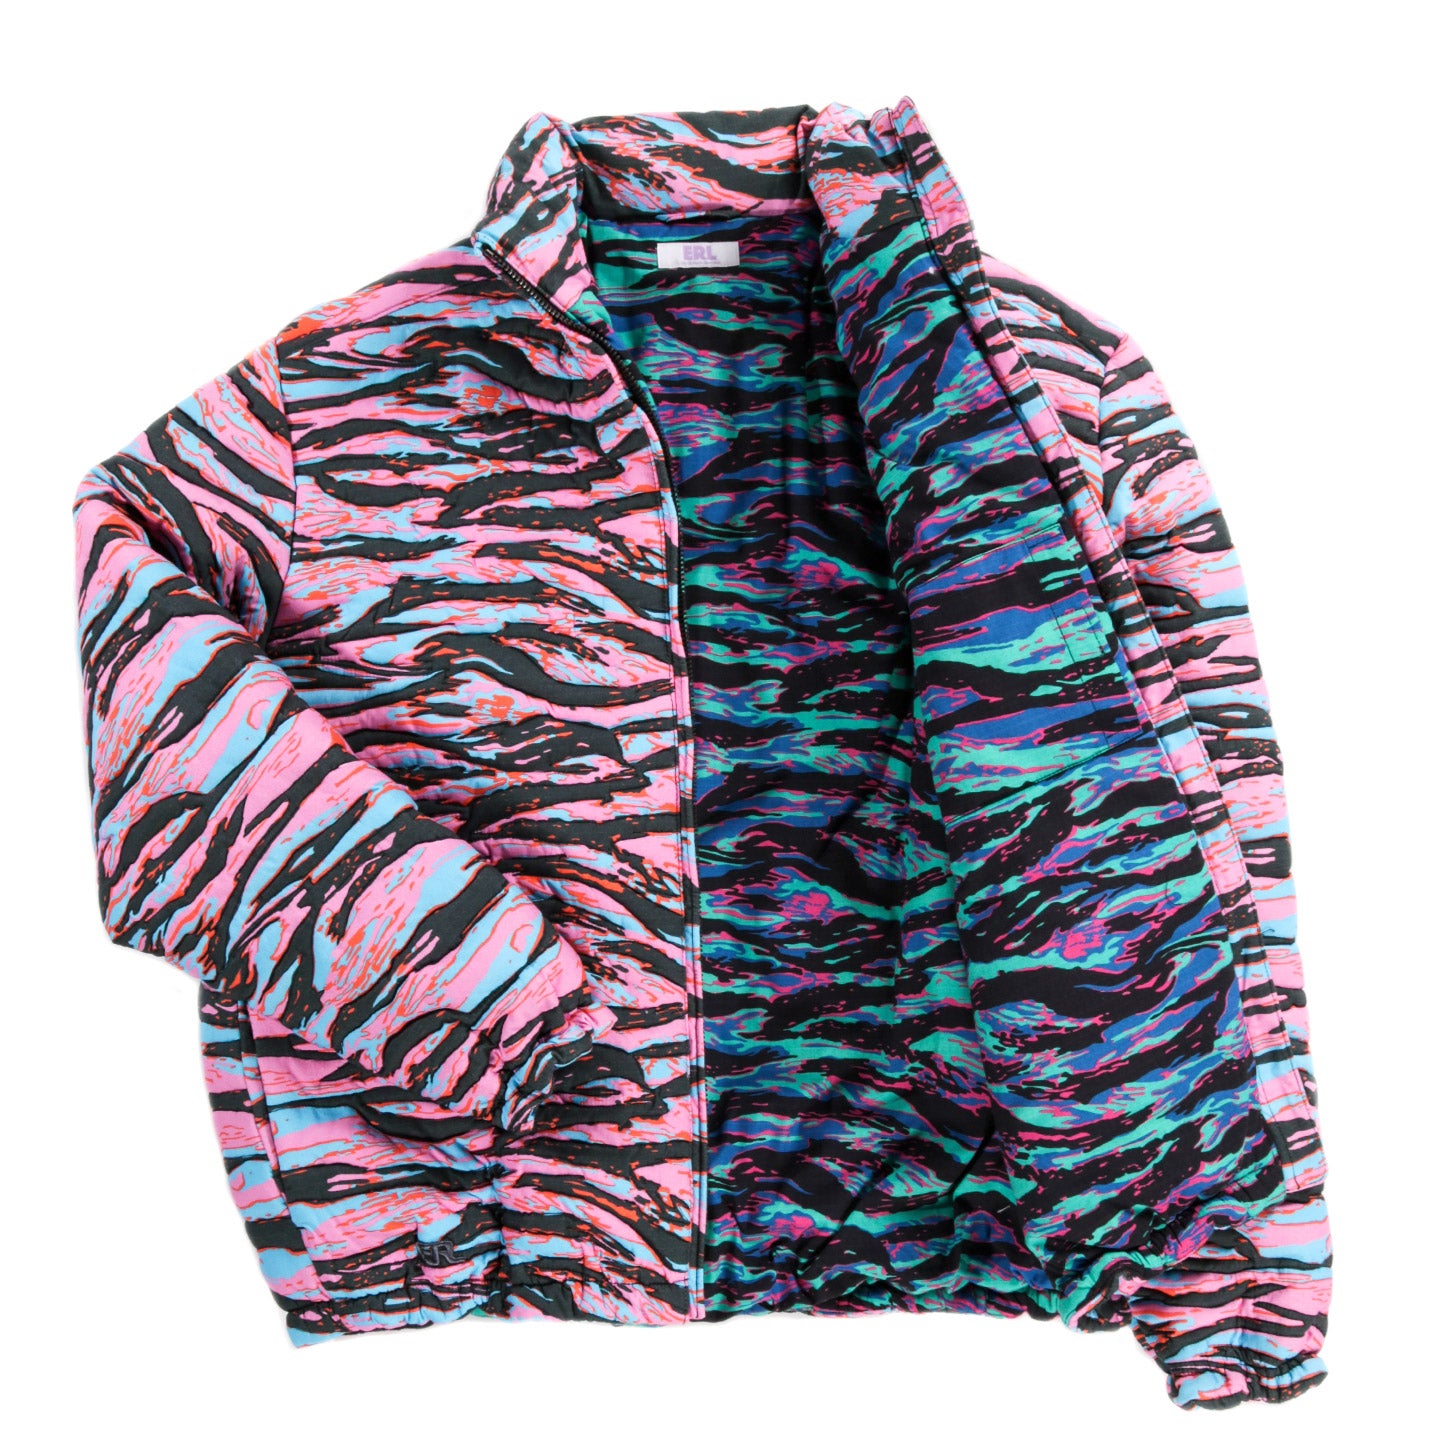 ERL RAVE CAMO PUFFER PINK